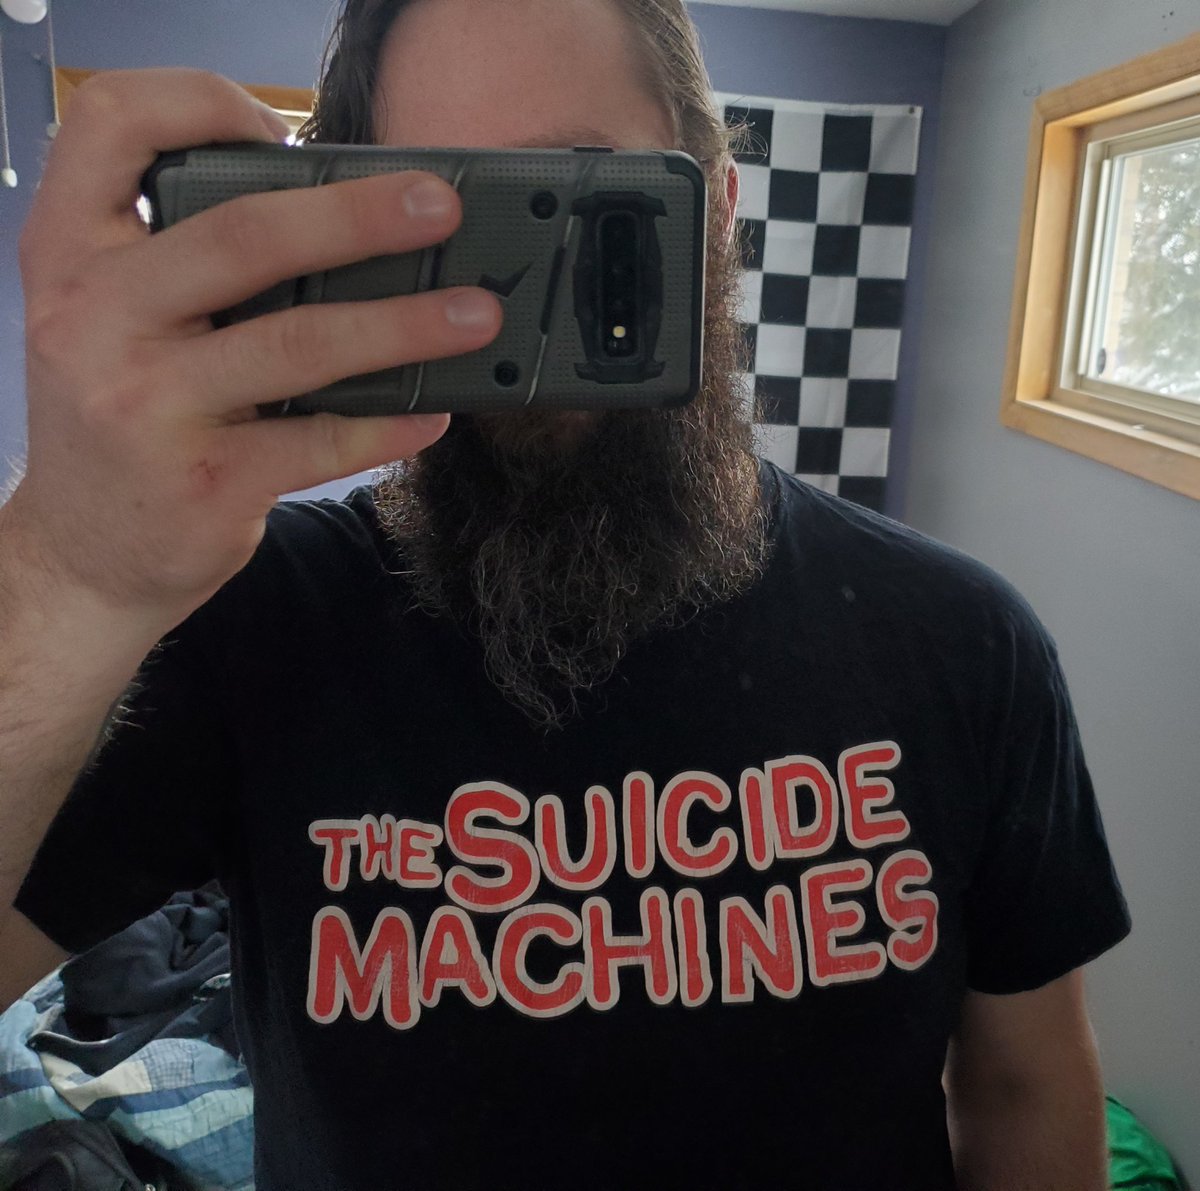 23, 24, and 25 are all the same band. Detroits own The Suicide Machines. Yes I did buy the same shirt in transverse color schemes.